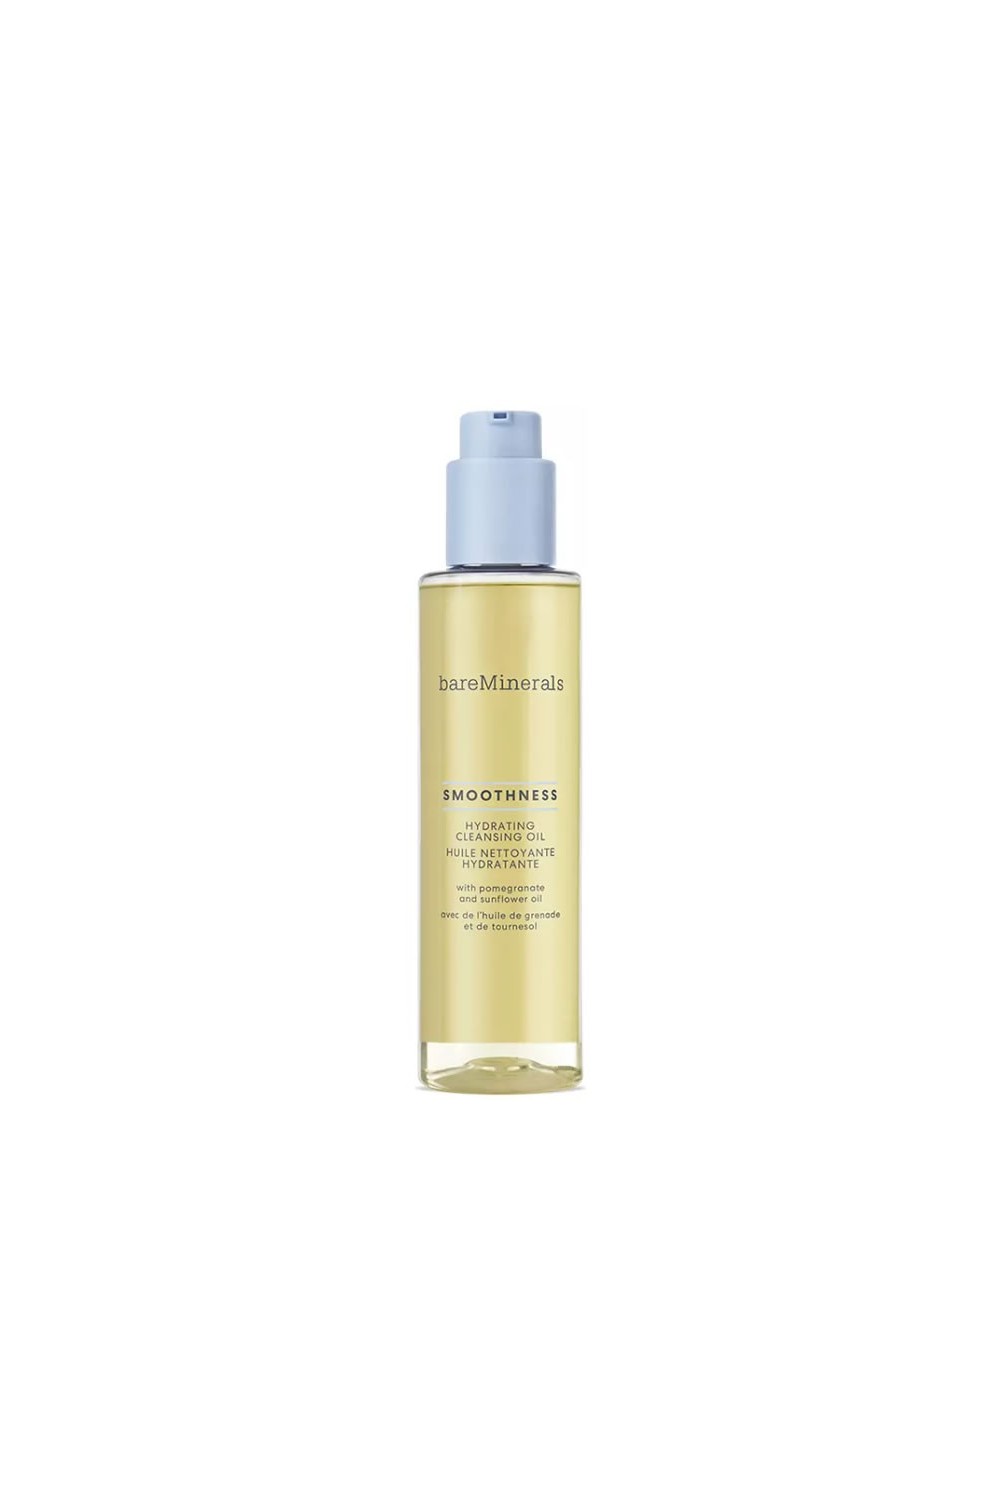 Bareminerals Smoothness Cleansing Oil 180ml